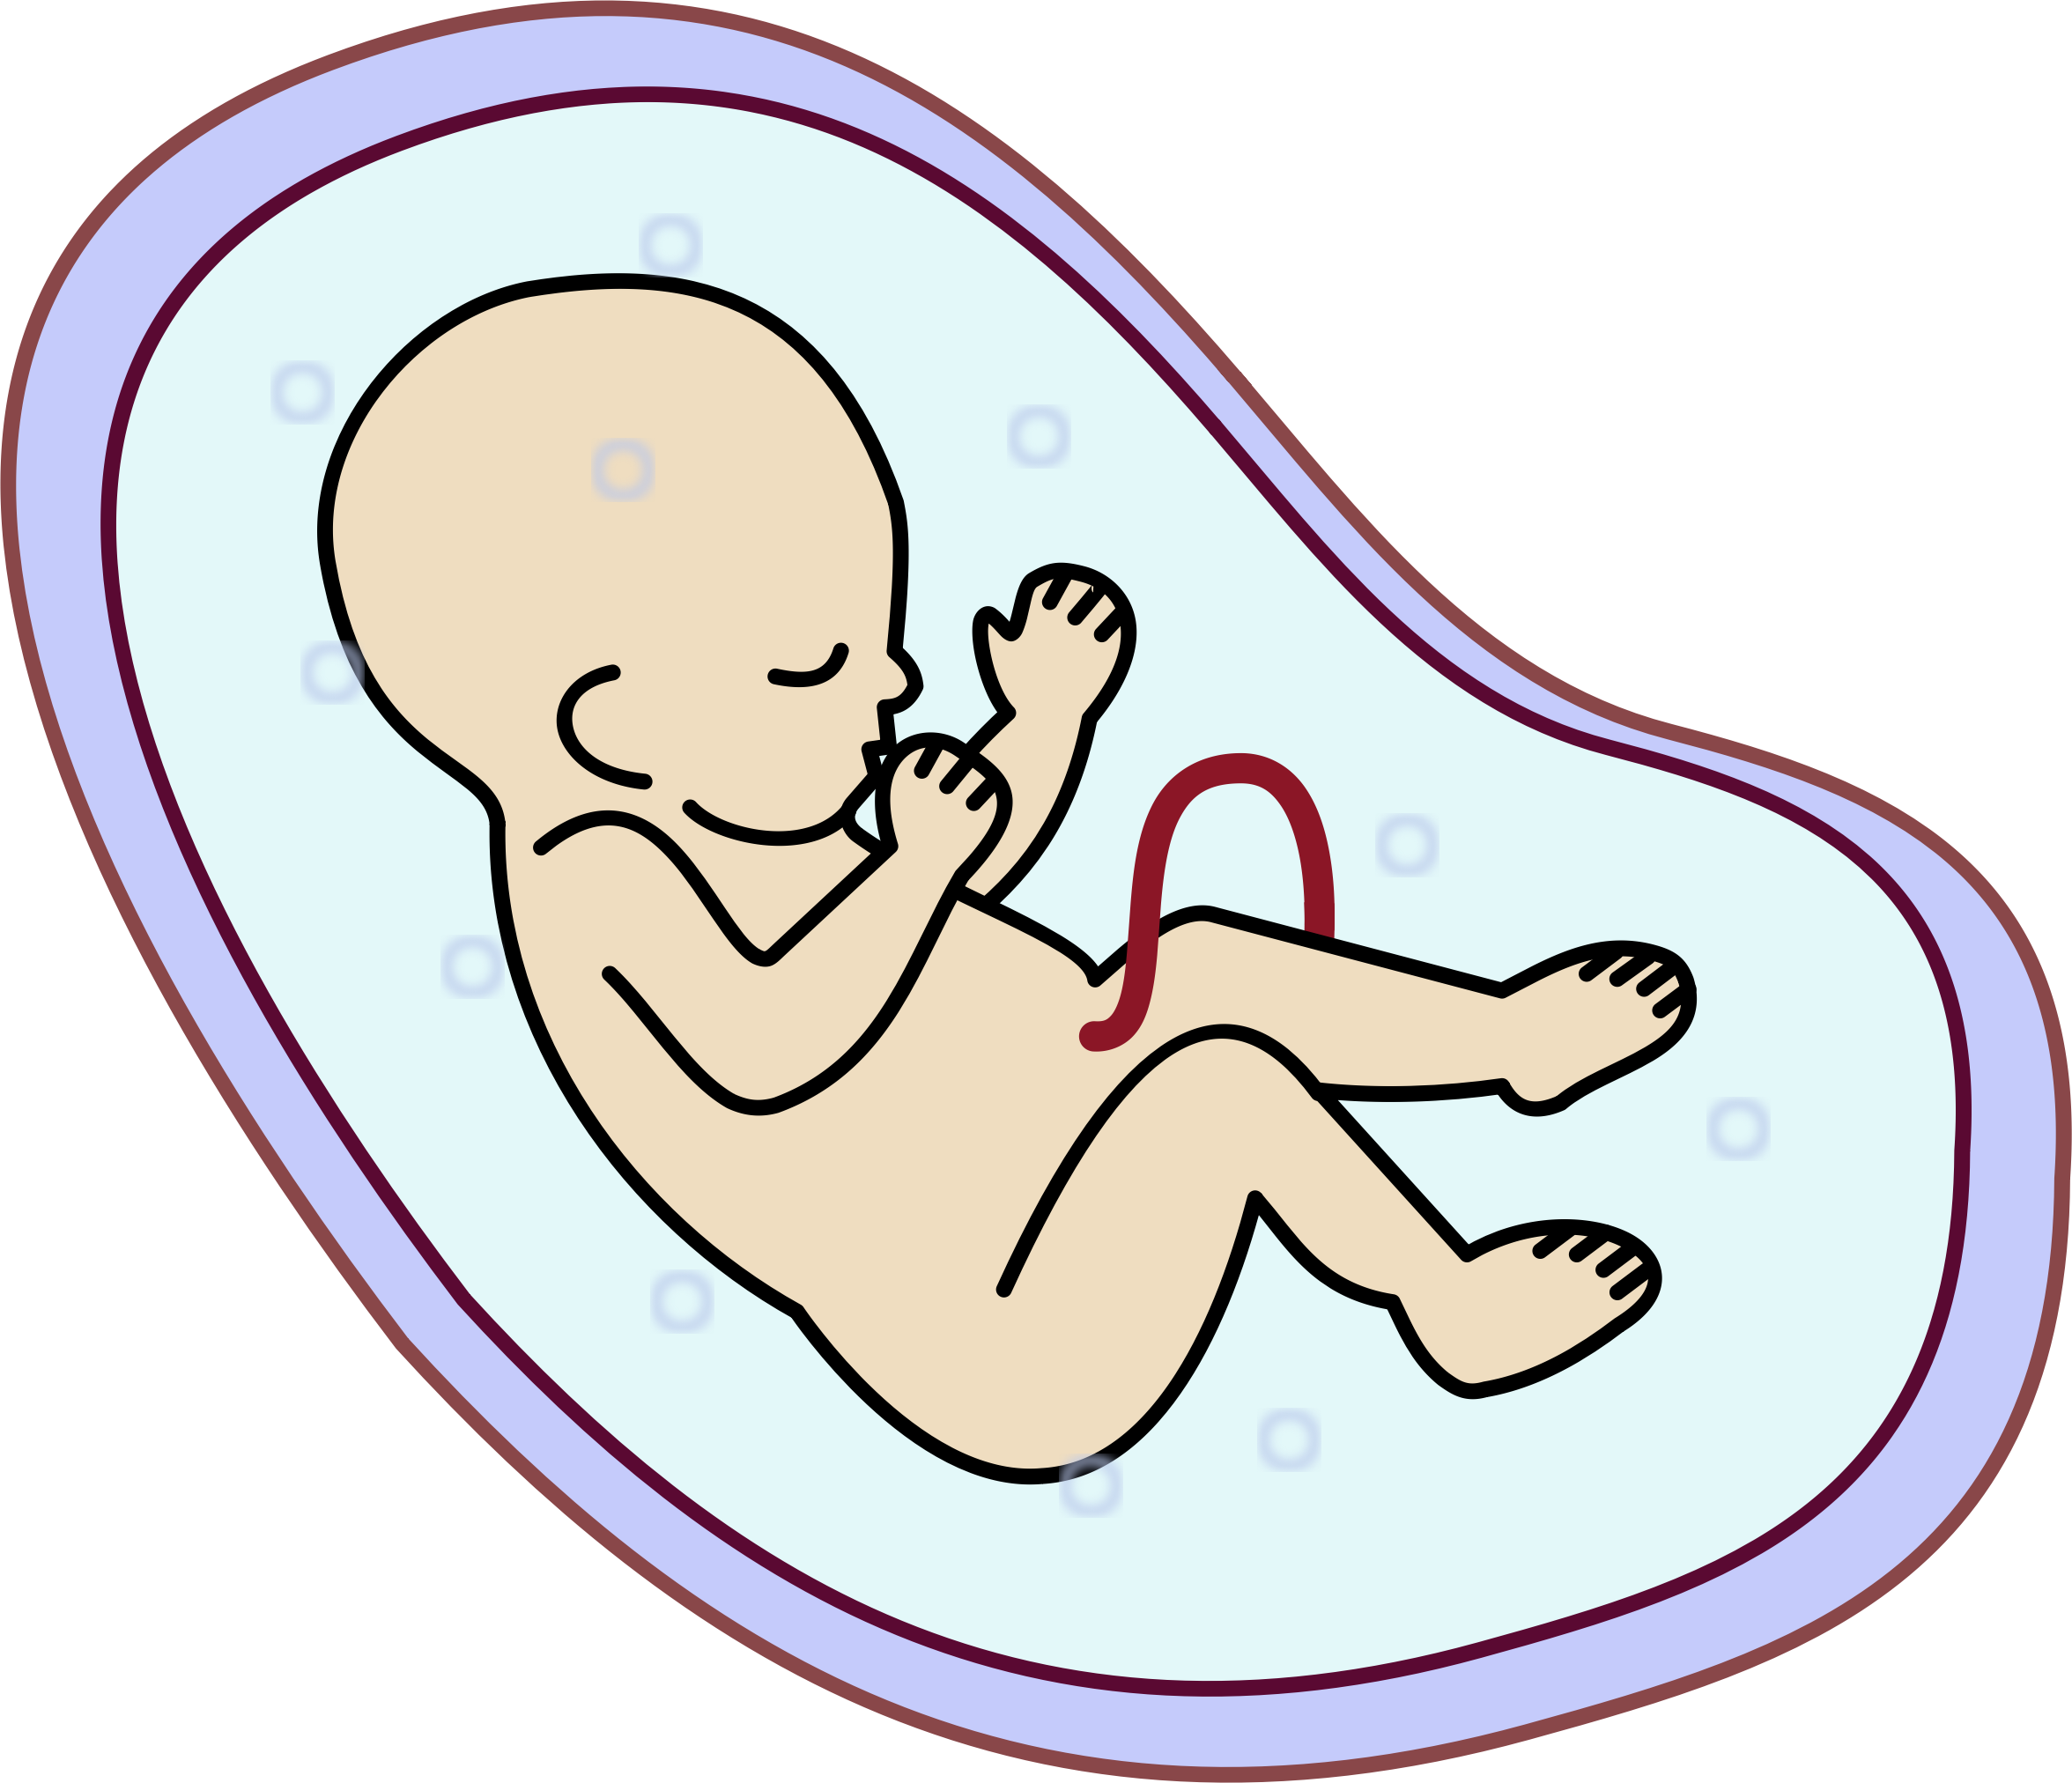 Growth clipart stage. Collection of free embryos